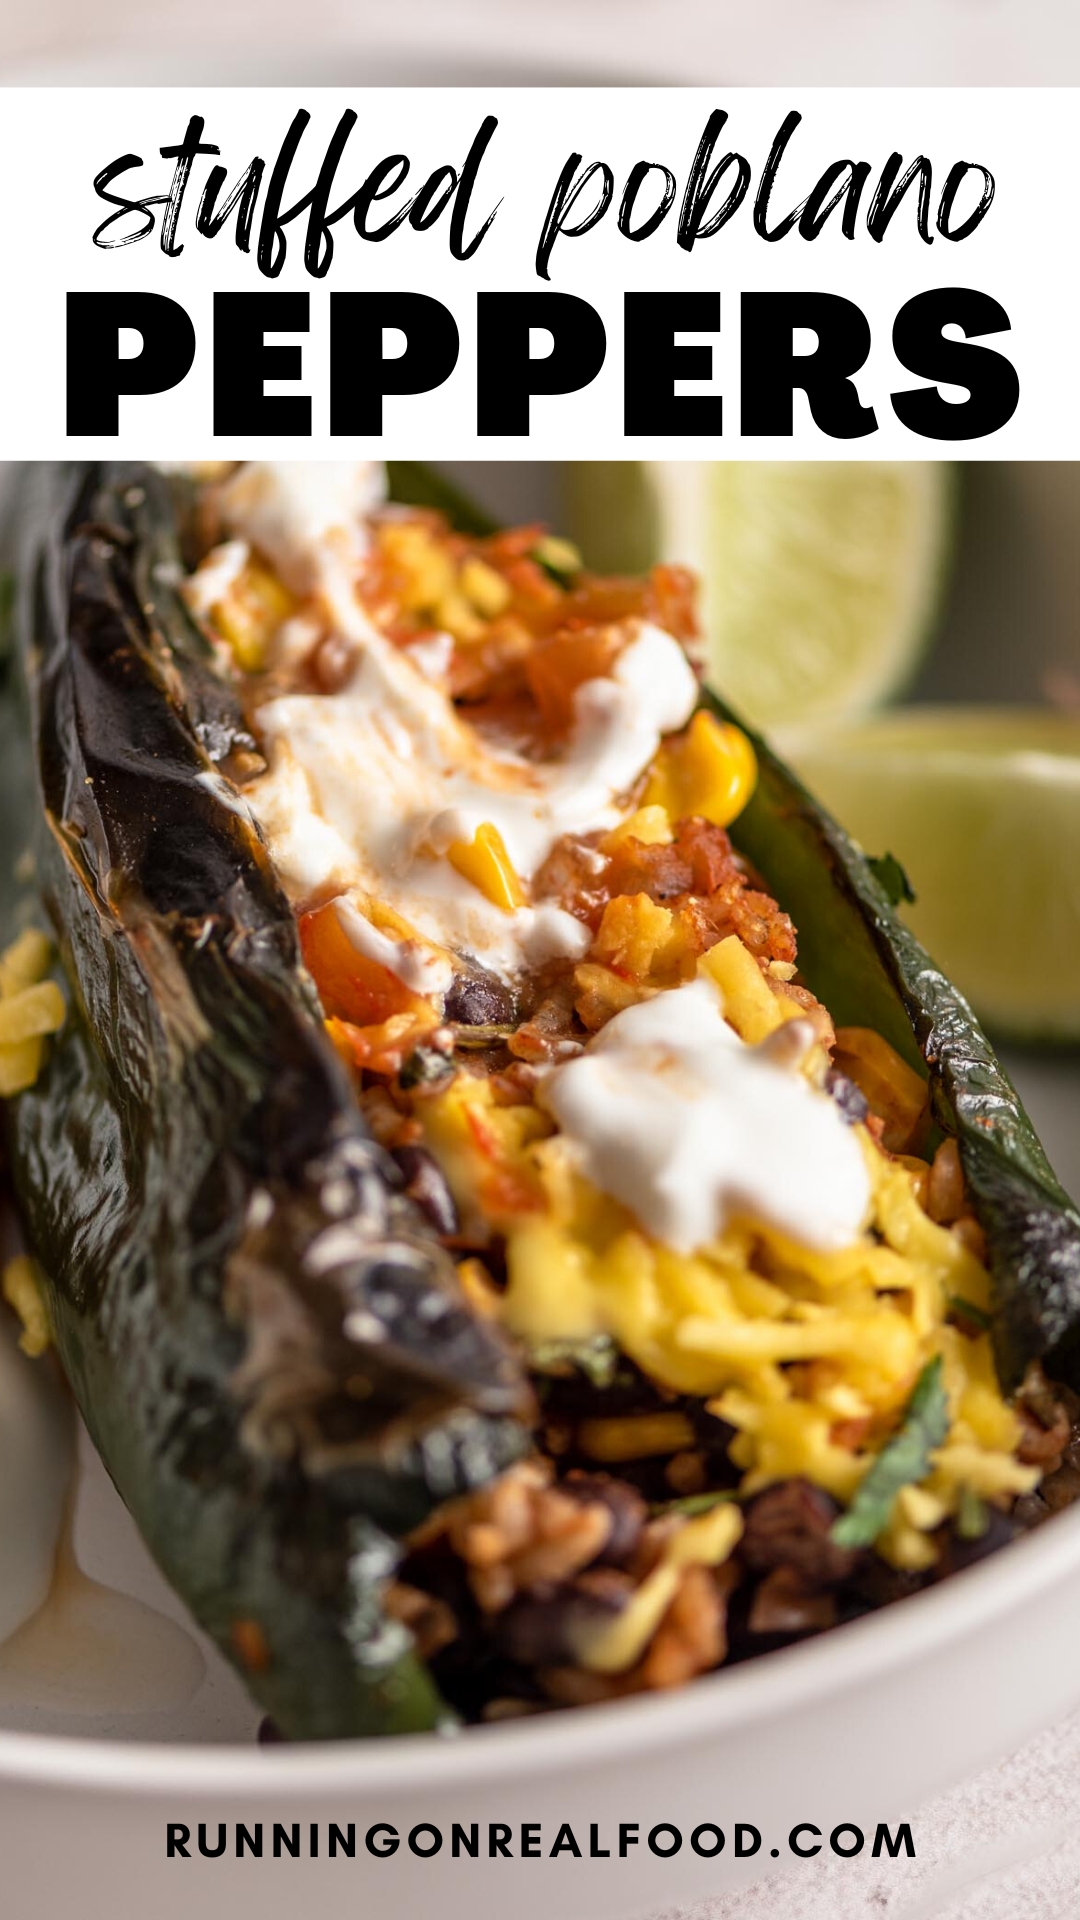 Pinterest graphic for vegan stuffed poblano peppers with an image and a stylized text title.